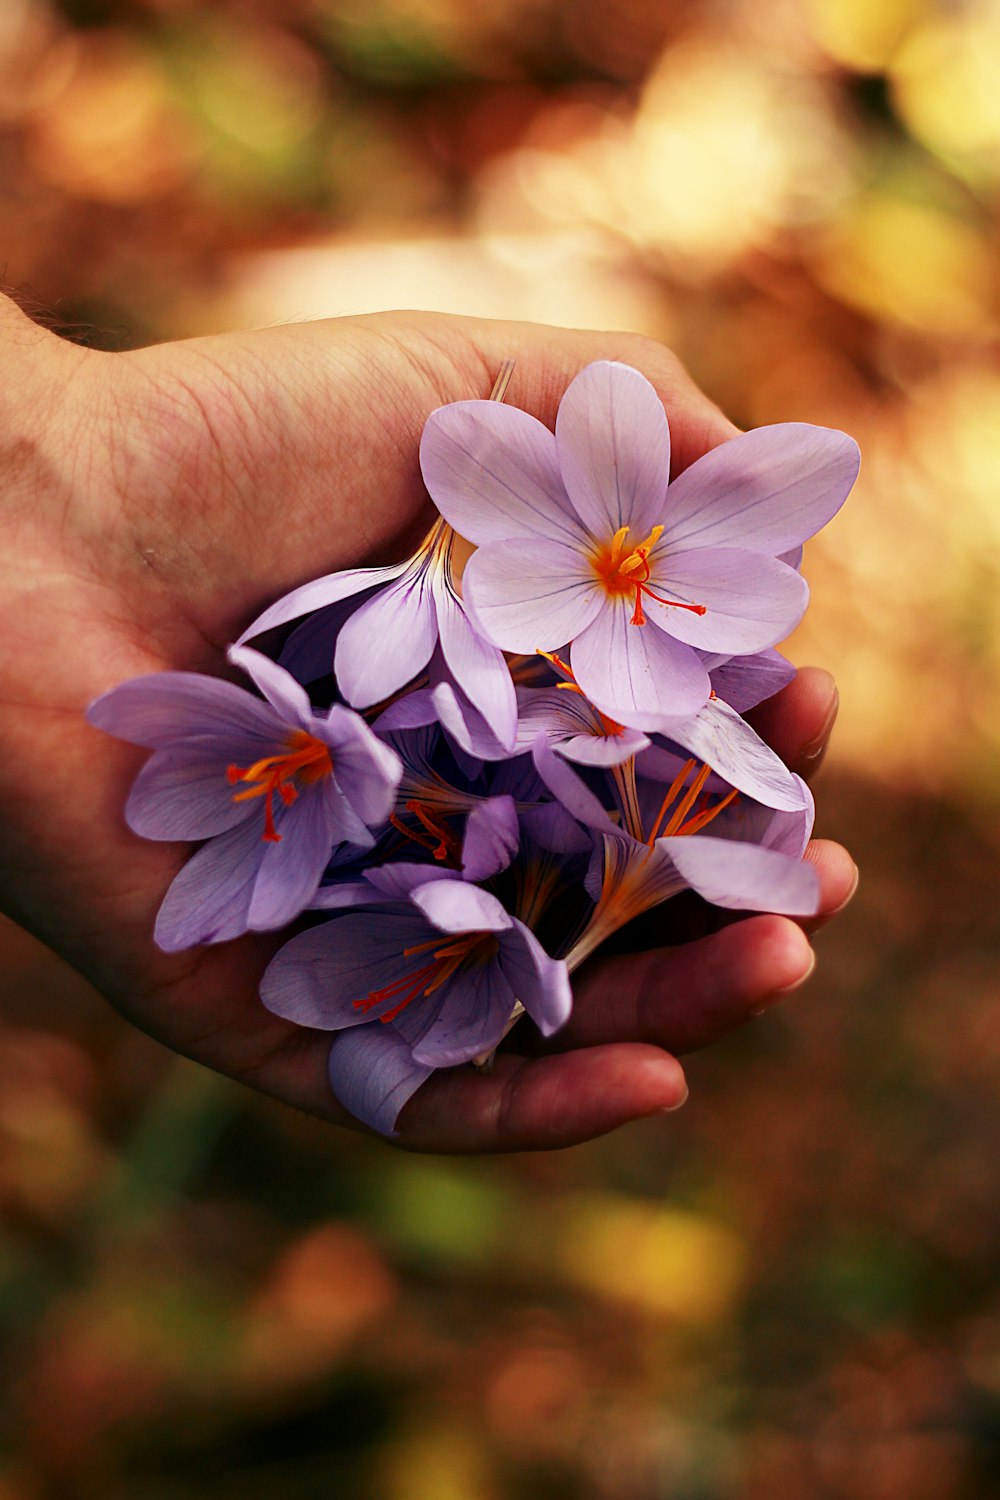 purple petaled flowers on person's hand